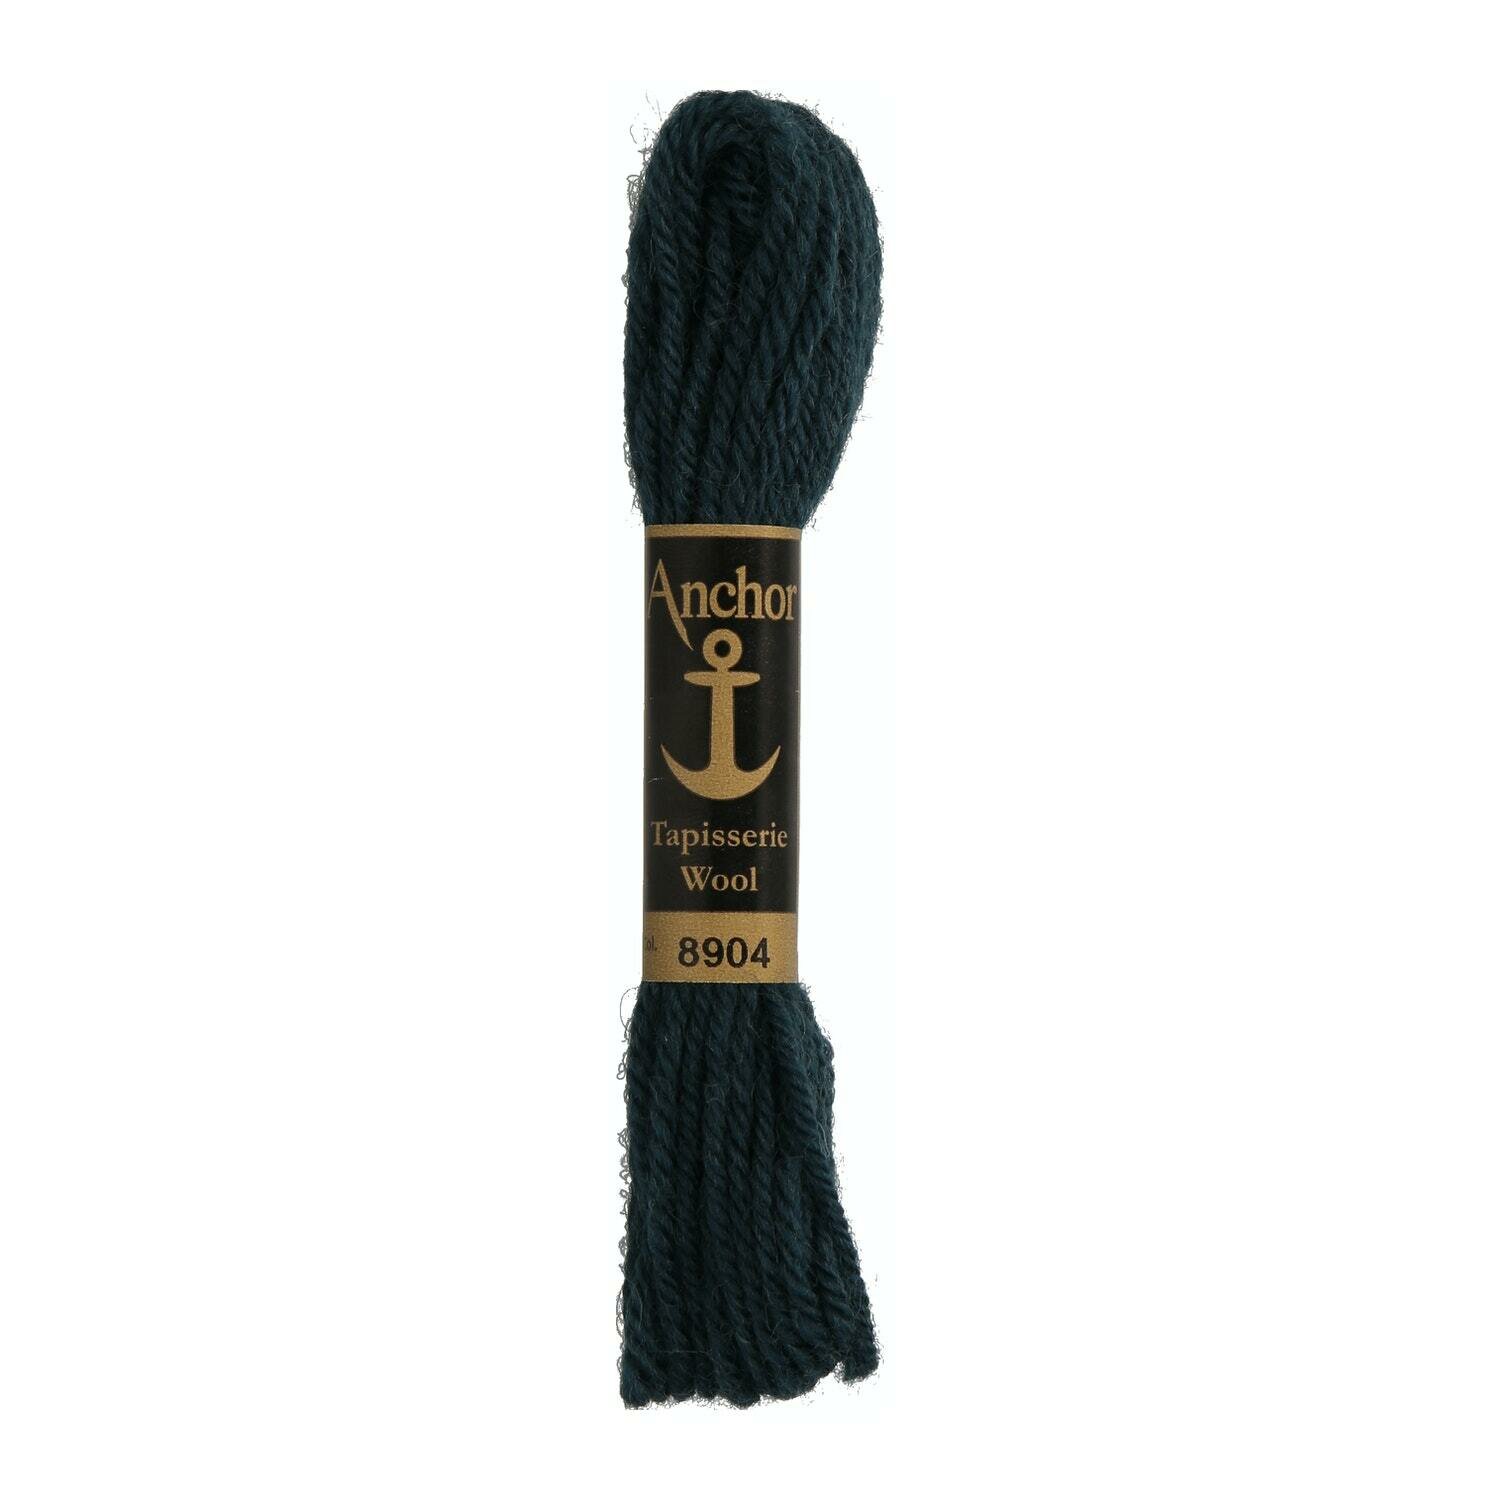 Anchor Tapisserie Wool # 08904